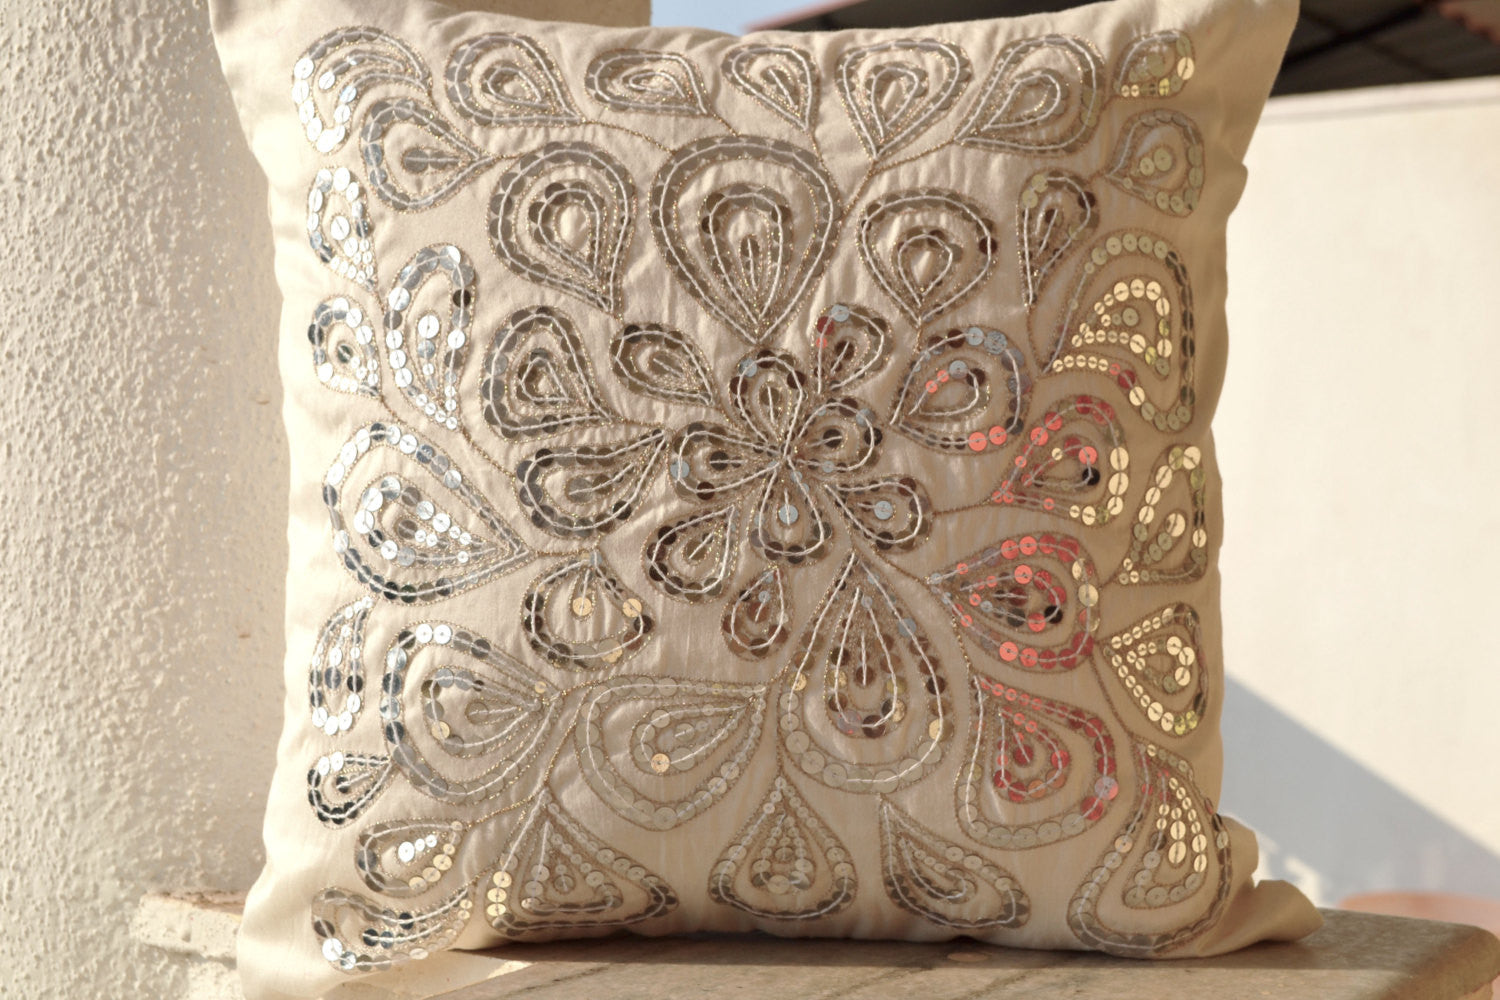 Handmade ivory white throw pillow with silver sequin